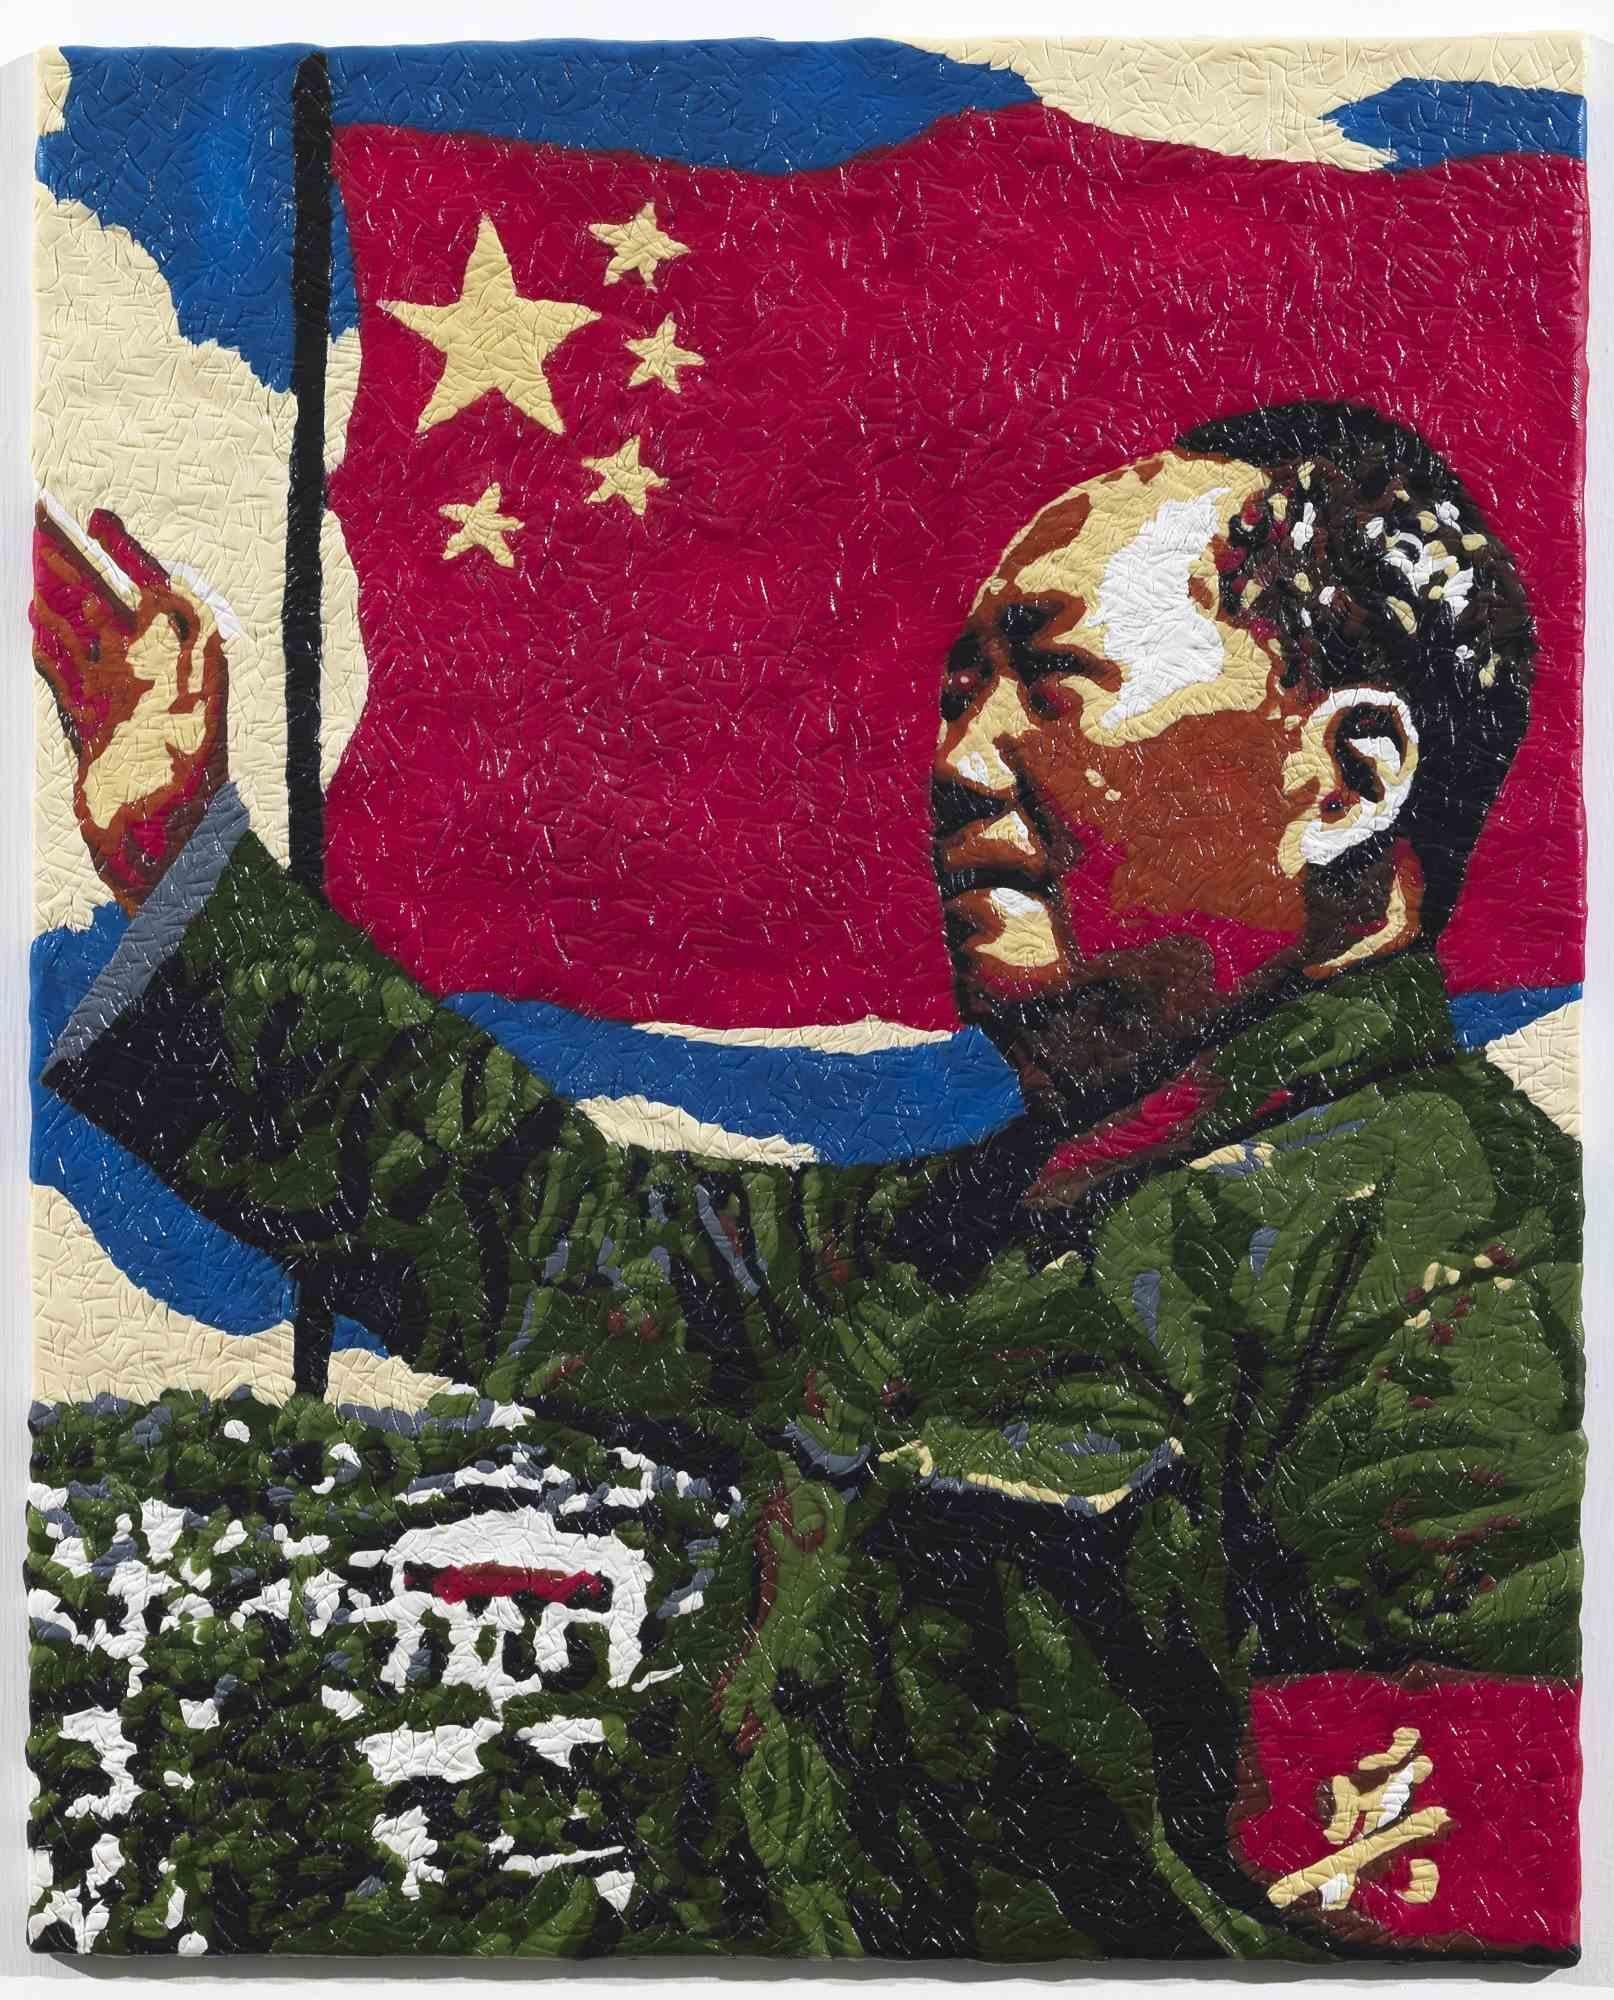 Mao is an original Contemporary Arwork realized by the Italian artist Maurizio Savini (b. Rome, 1962) in 2014. 

Original Encaustic of chewing gum on board. 

Hand-signed by the artist on the back of the canvas. 

The Certificate of Authenticity is